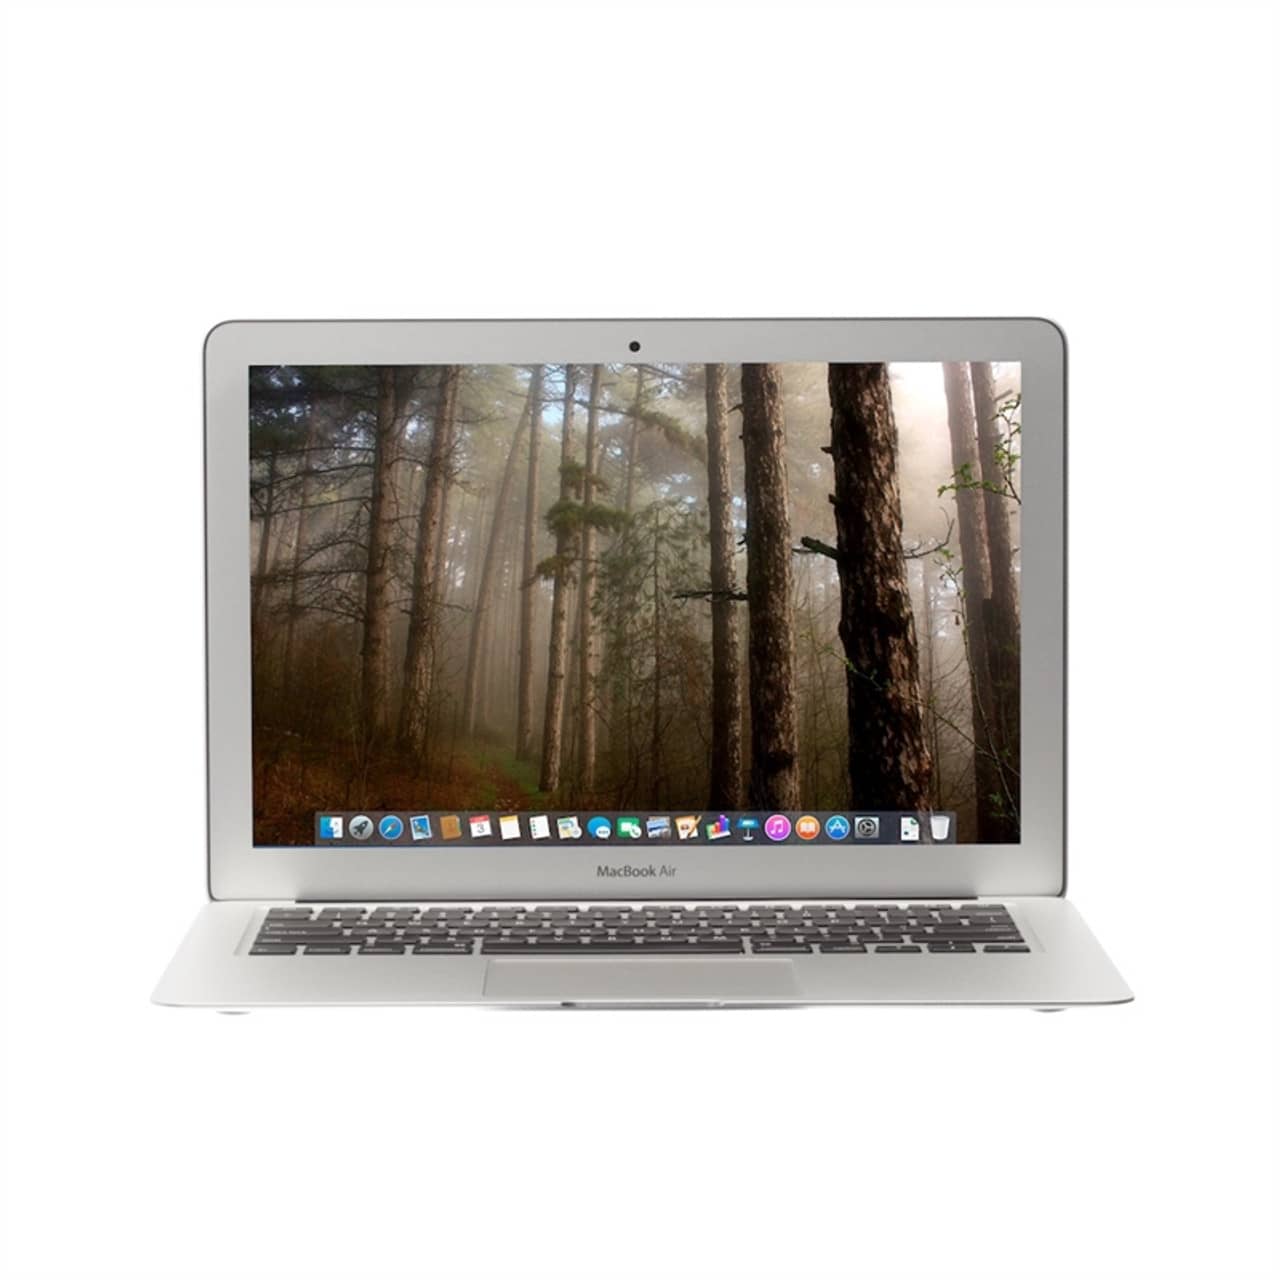 Apple MacBook Air 13 inch Early 2014 Technical Specifications